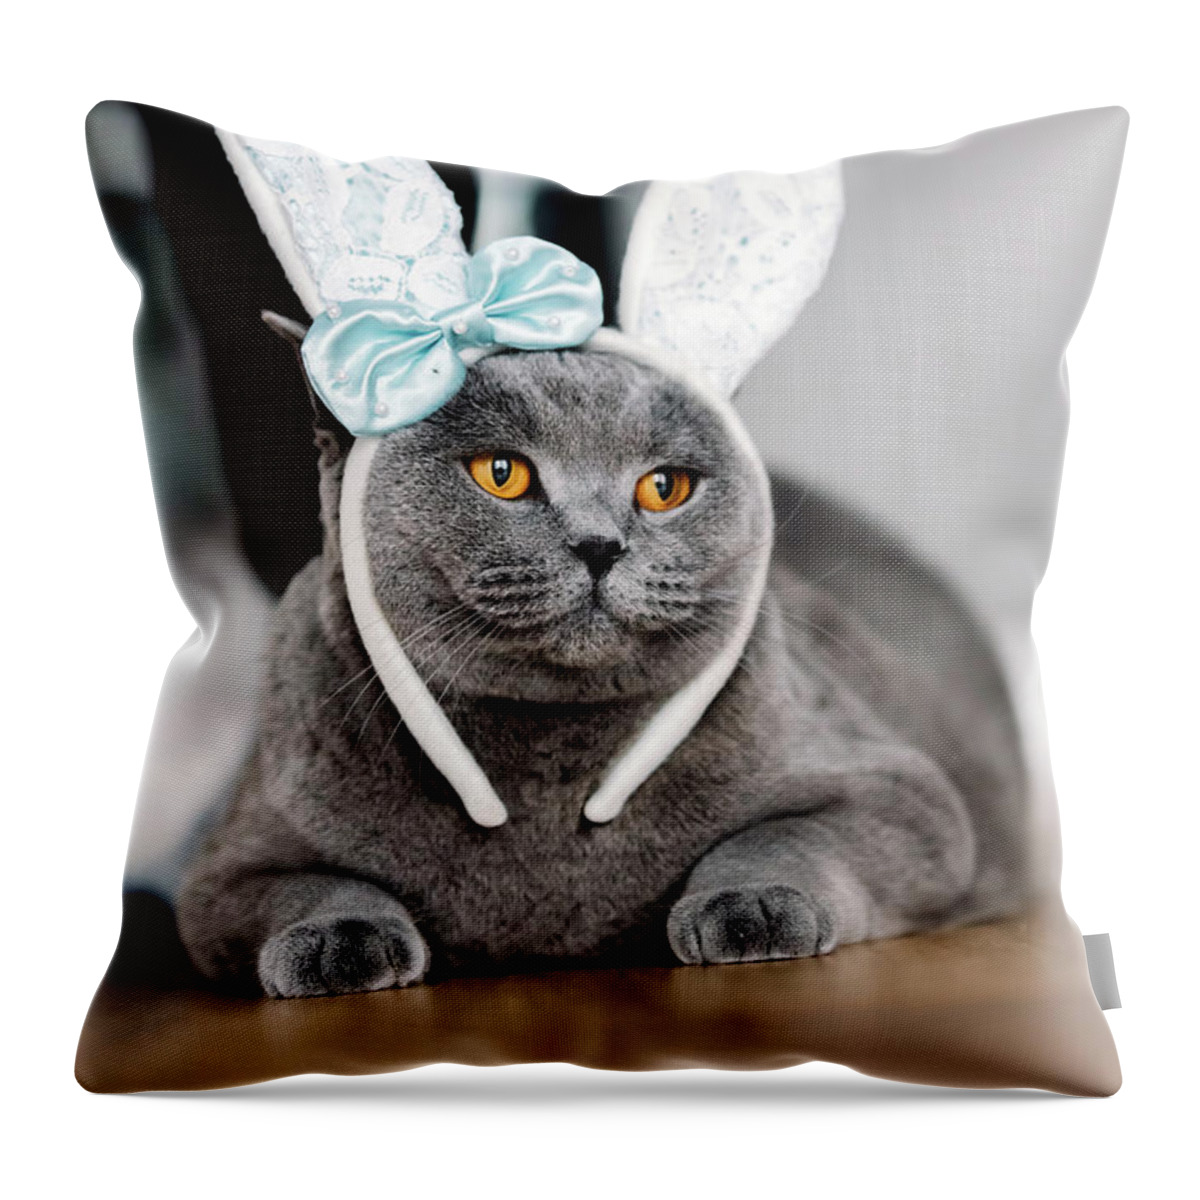 Cat Throw Pillow featuring the photograph Grey cat with cute bunny-like headband by Michal Bednarek